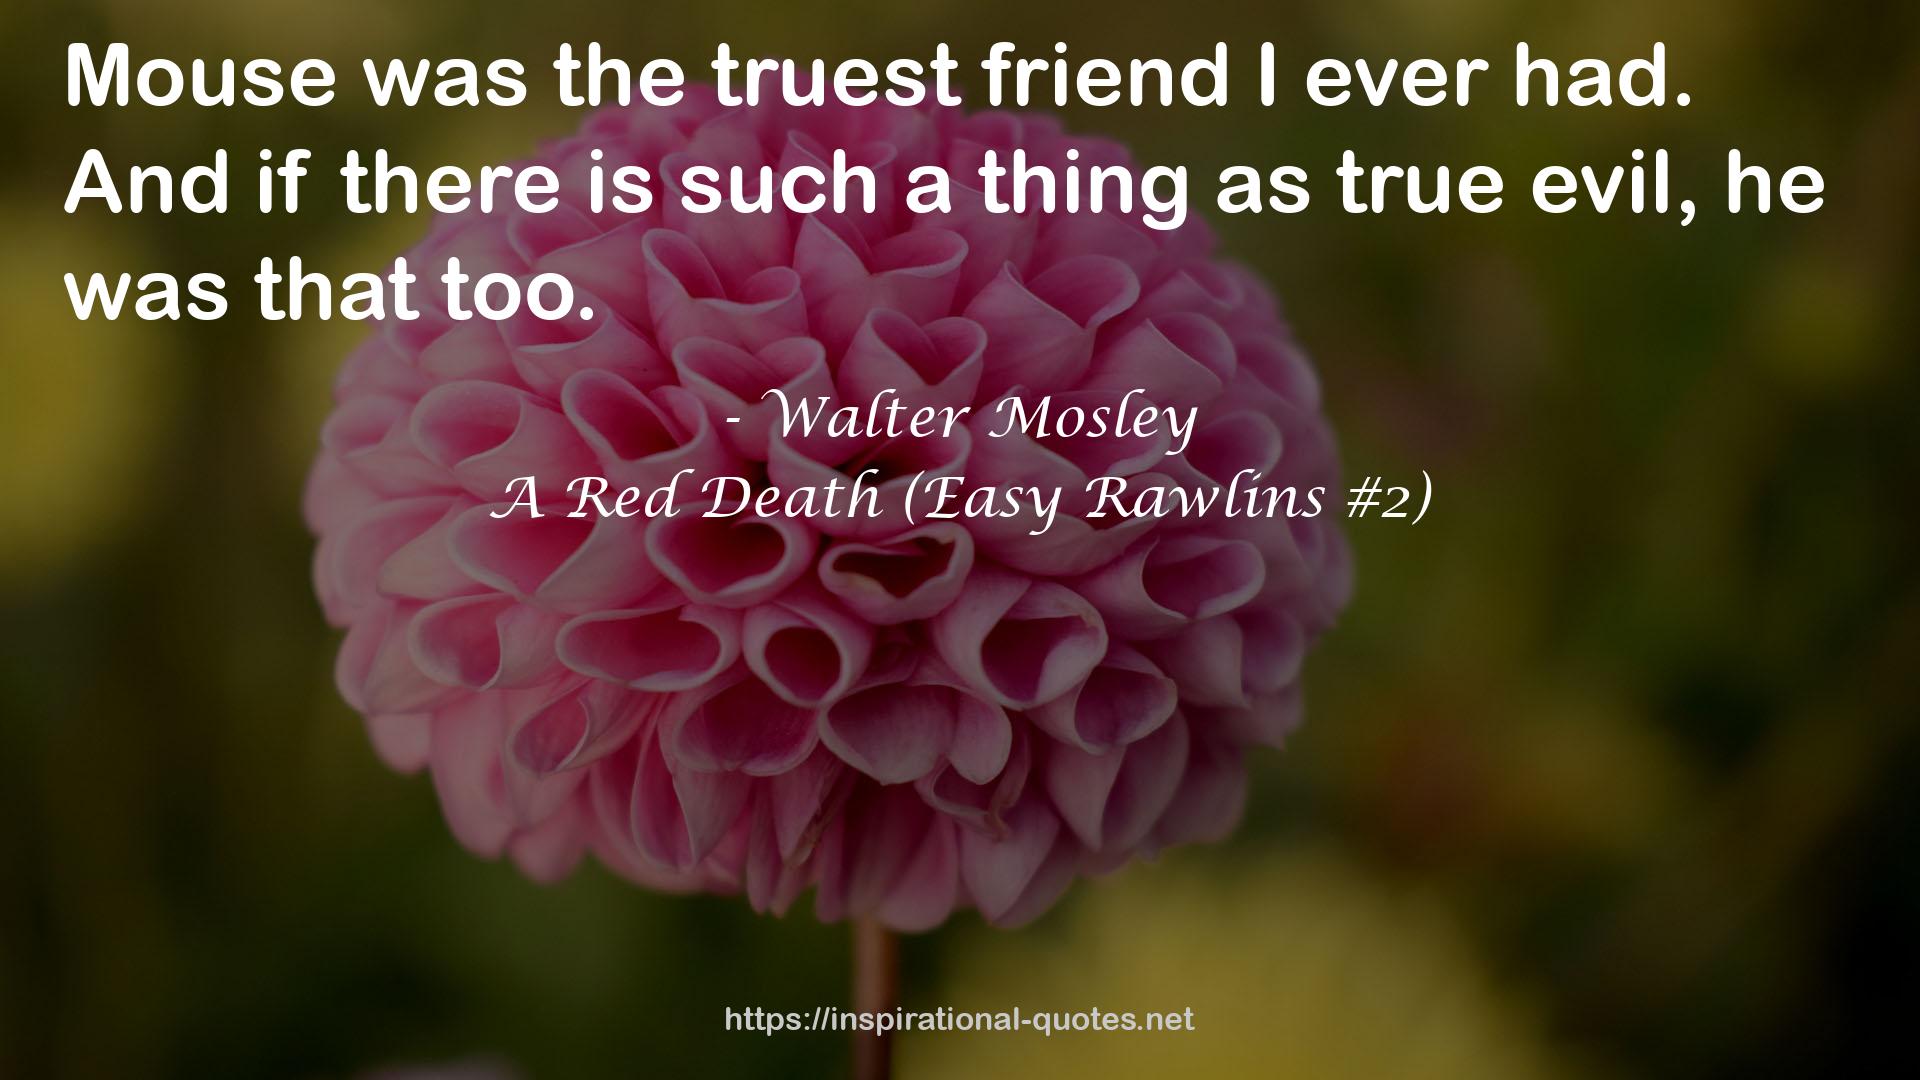 A Red Death (Easy Rawlins #2) QUOTES